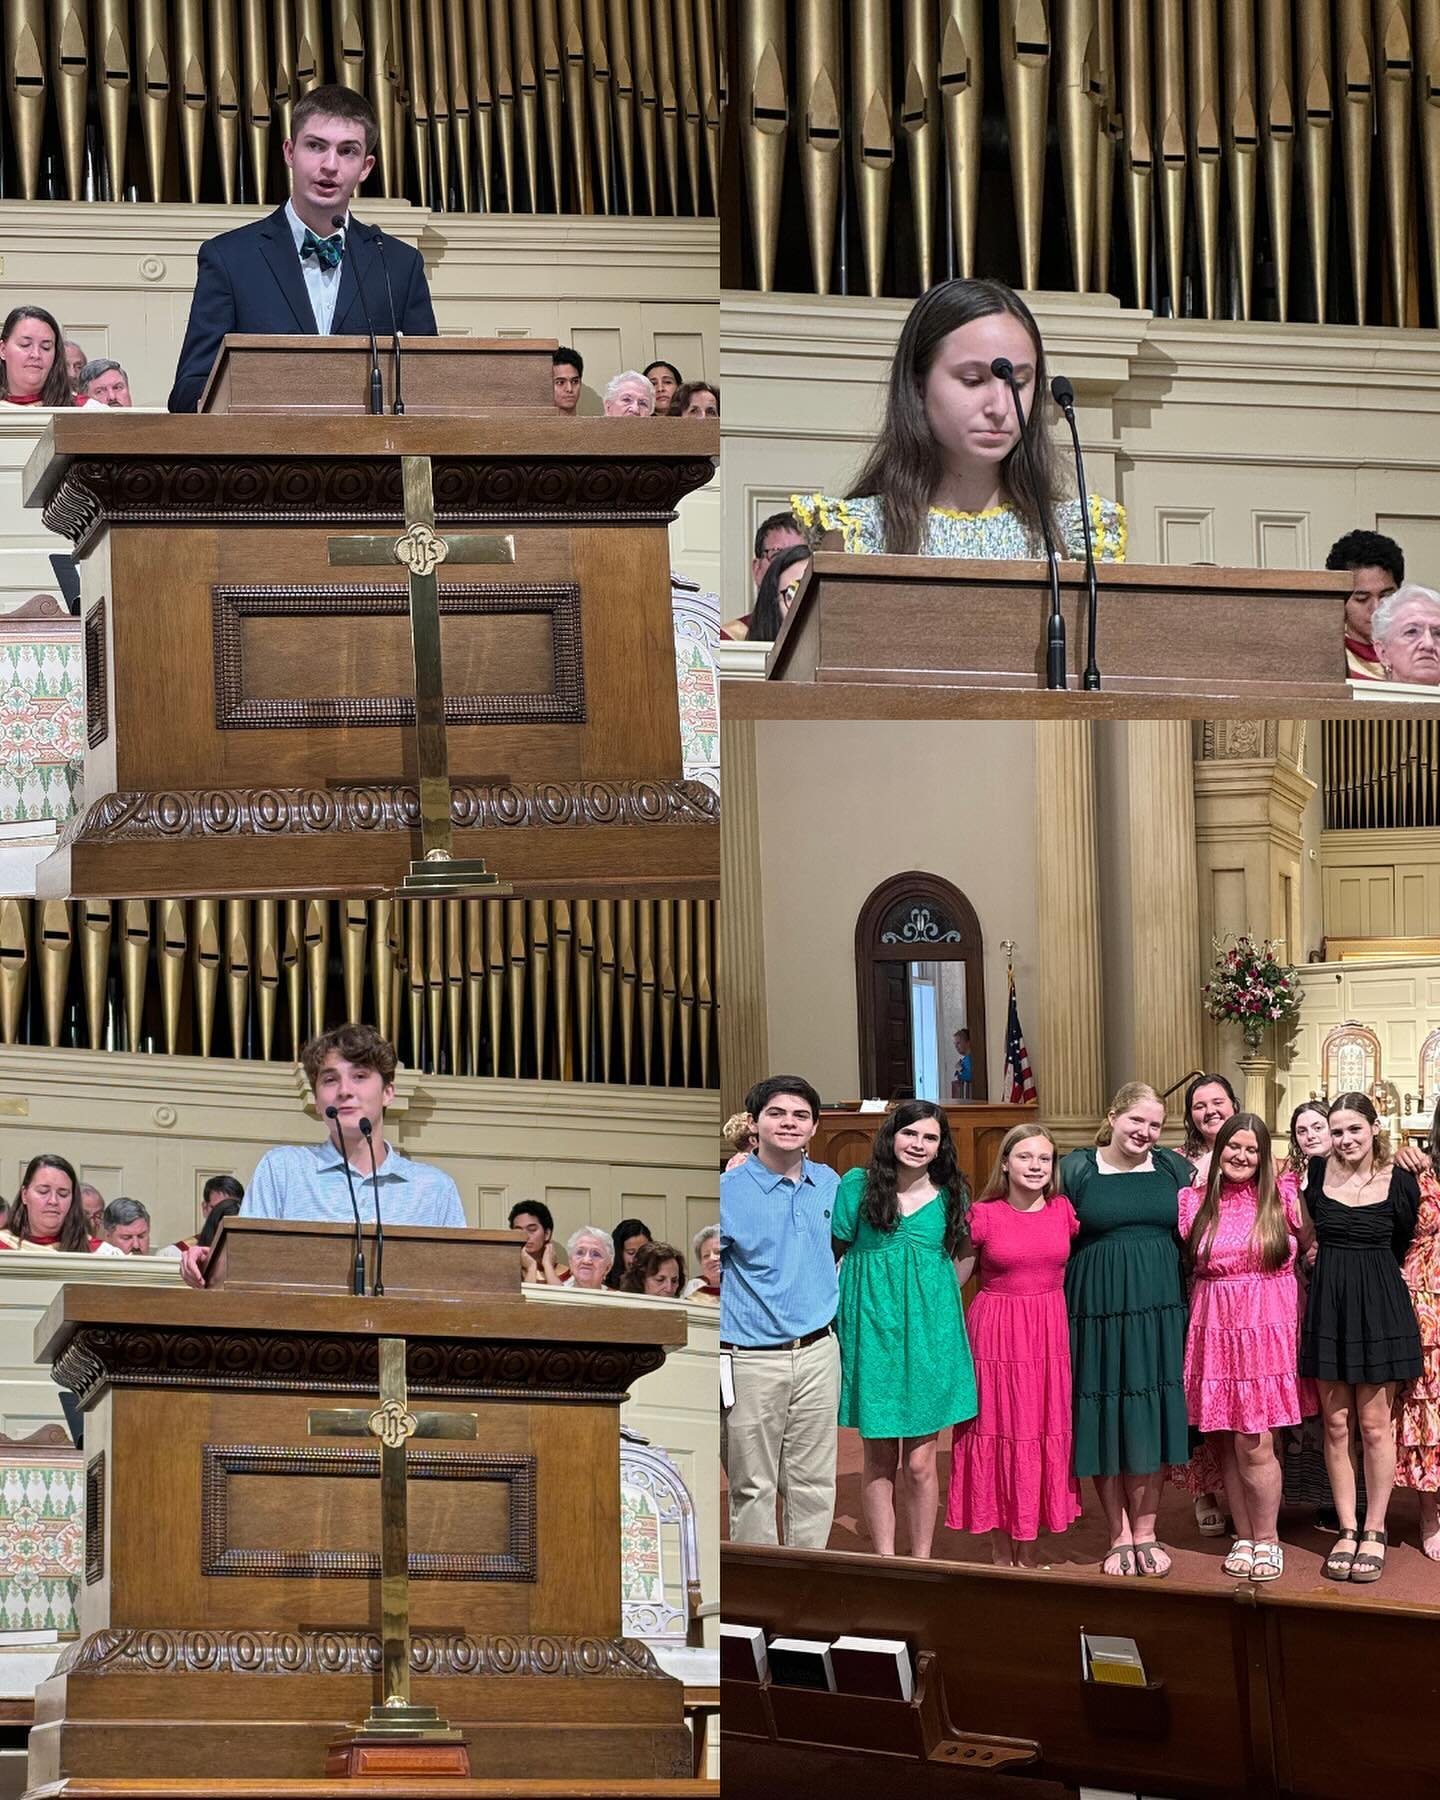 Youth Sunday was an incredible opportunity to lead our church family in worship. Check out all of these highlights and stay tuned for another important update from that special day!